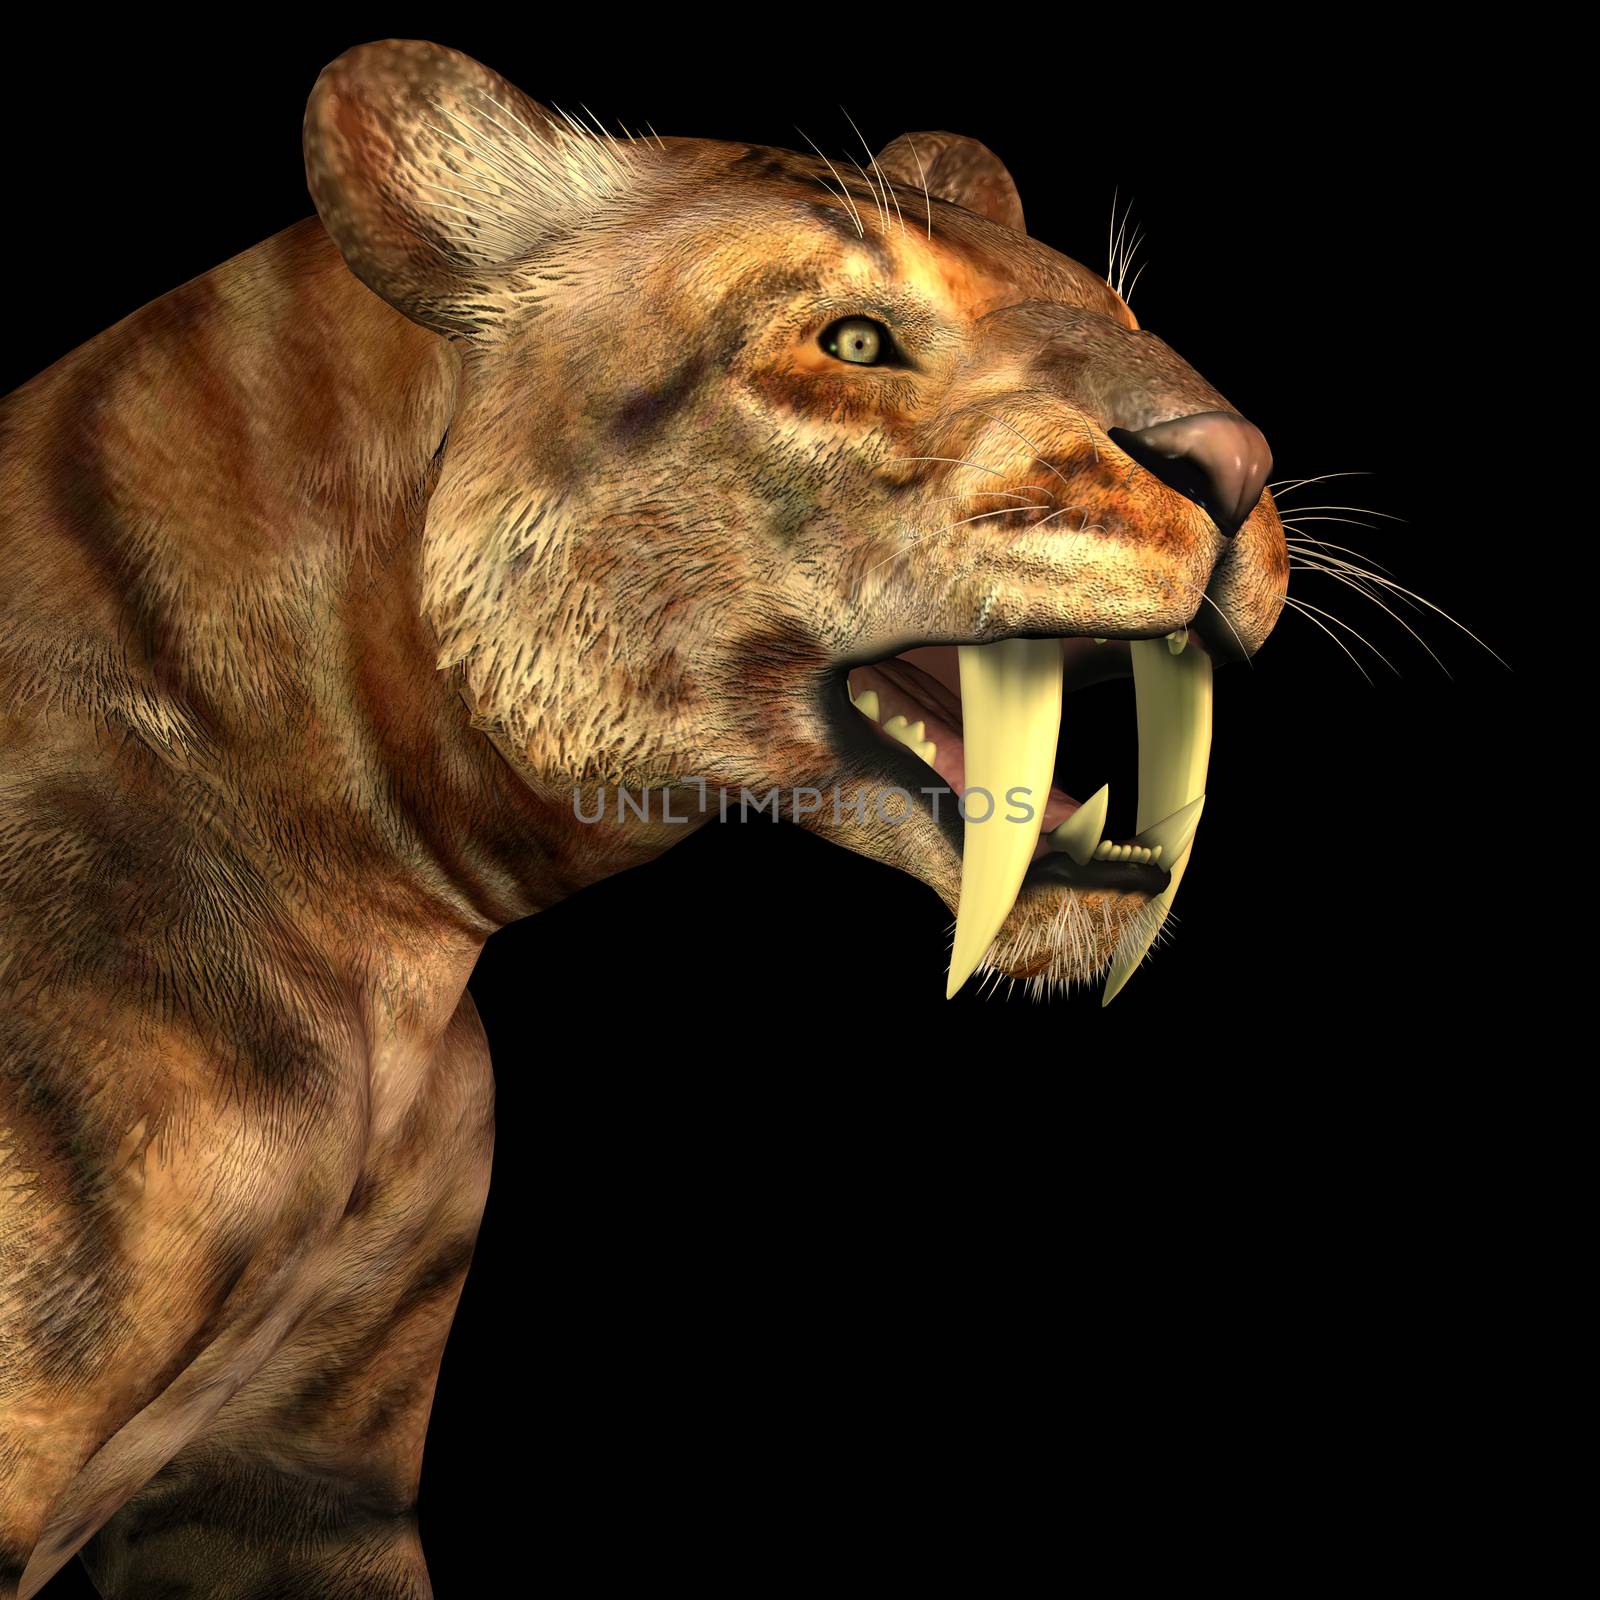 Saber-tooth Cat on Black by Catmando